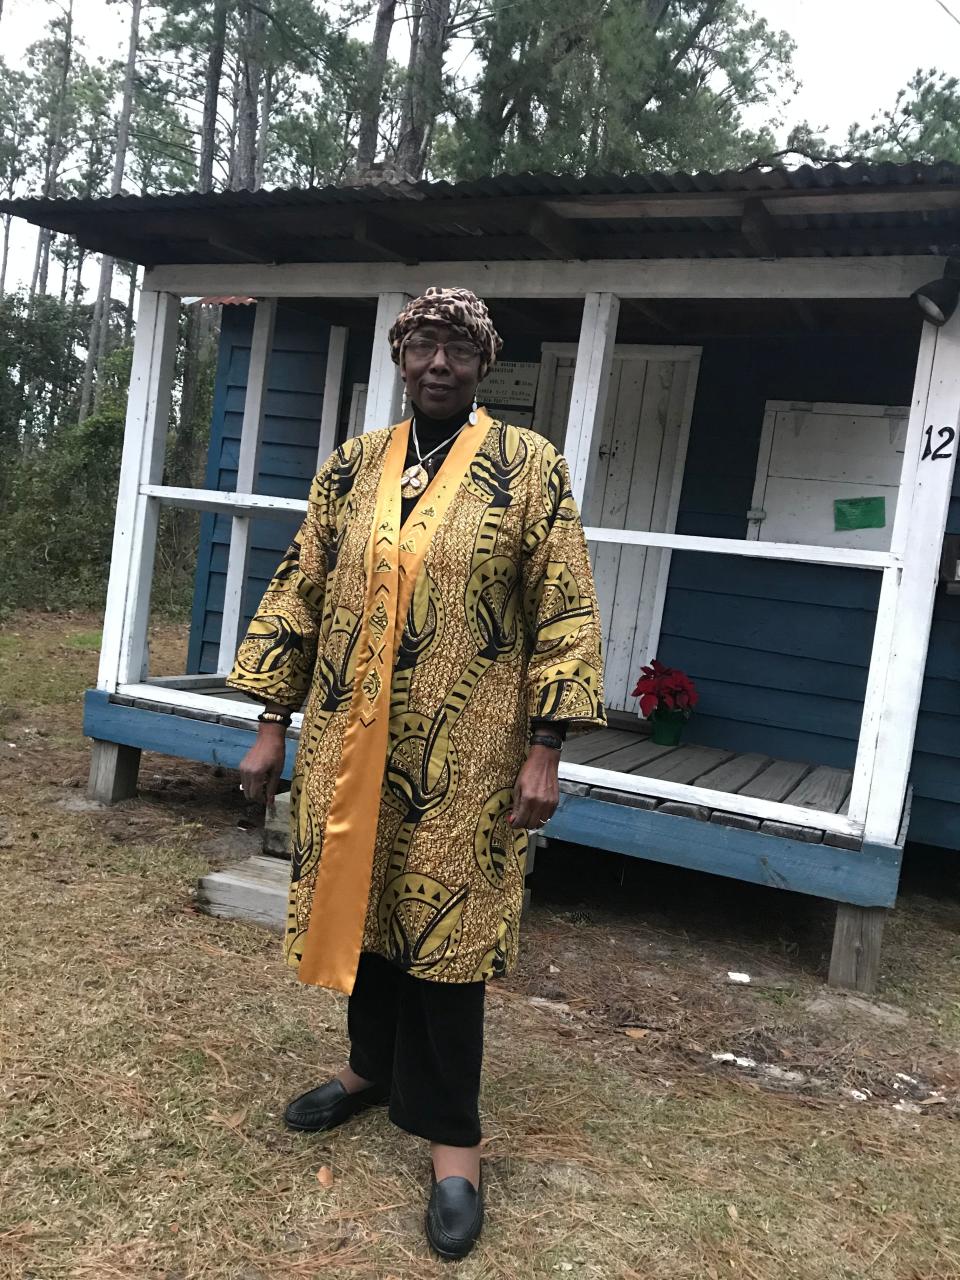 Louise Cohen stands outside her father's restored house, now called the Gullah Museum of Hilton Head Island, on January 15, 2019.